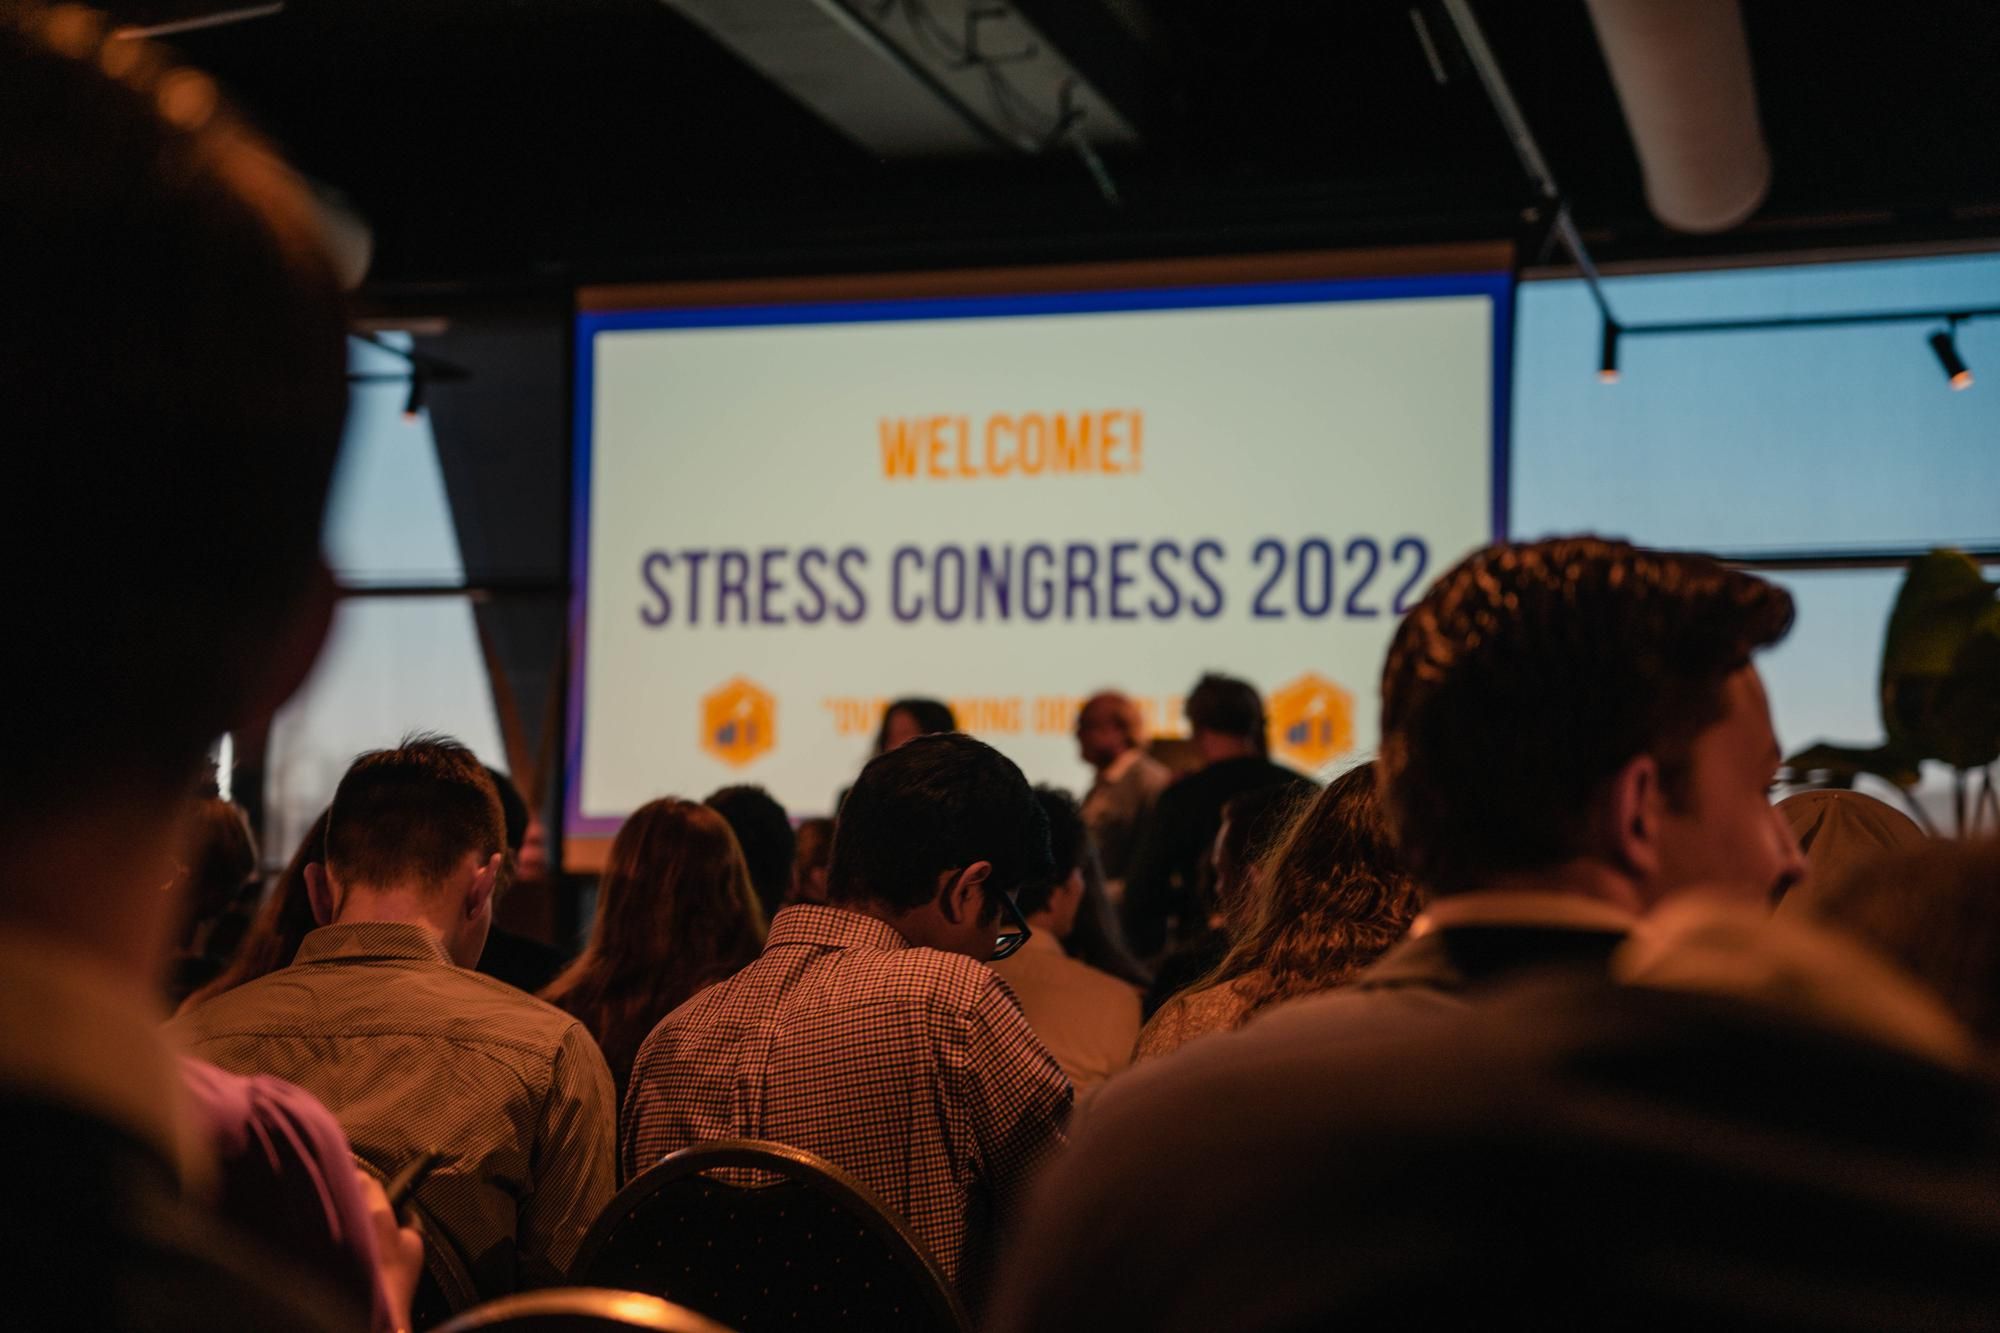 Sign up for the Stress Congress!